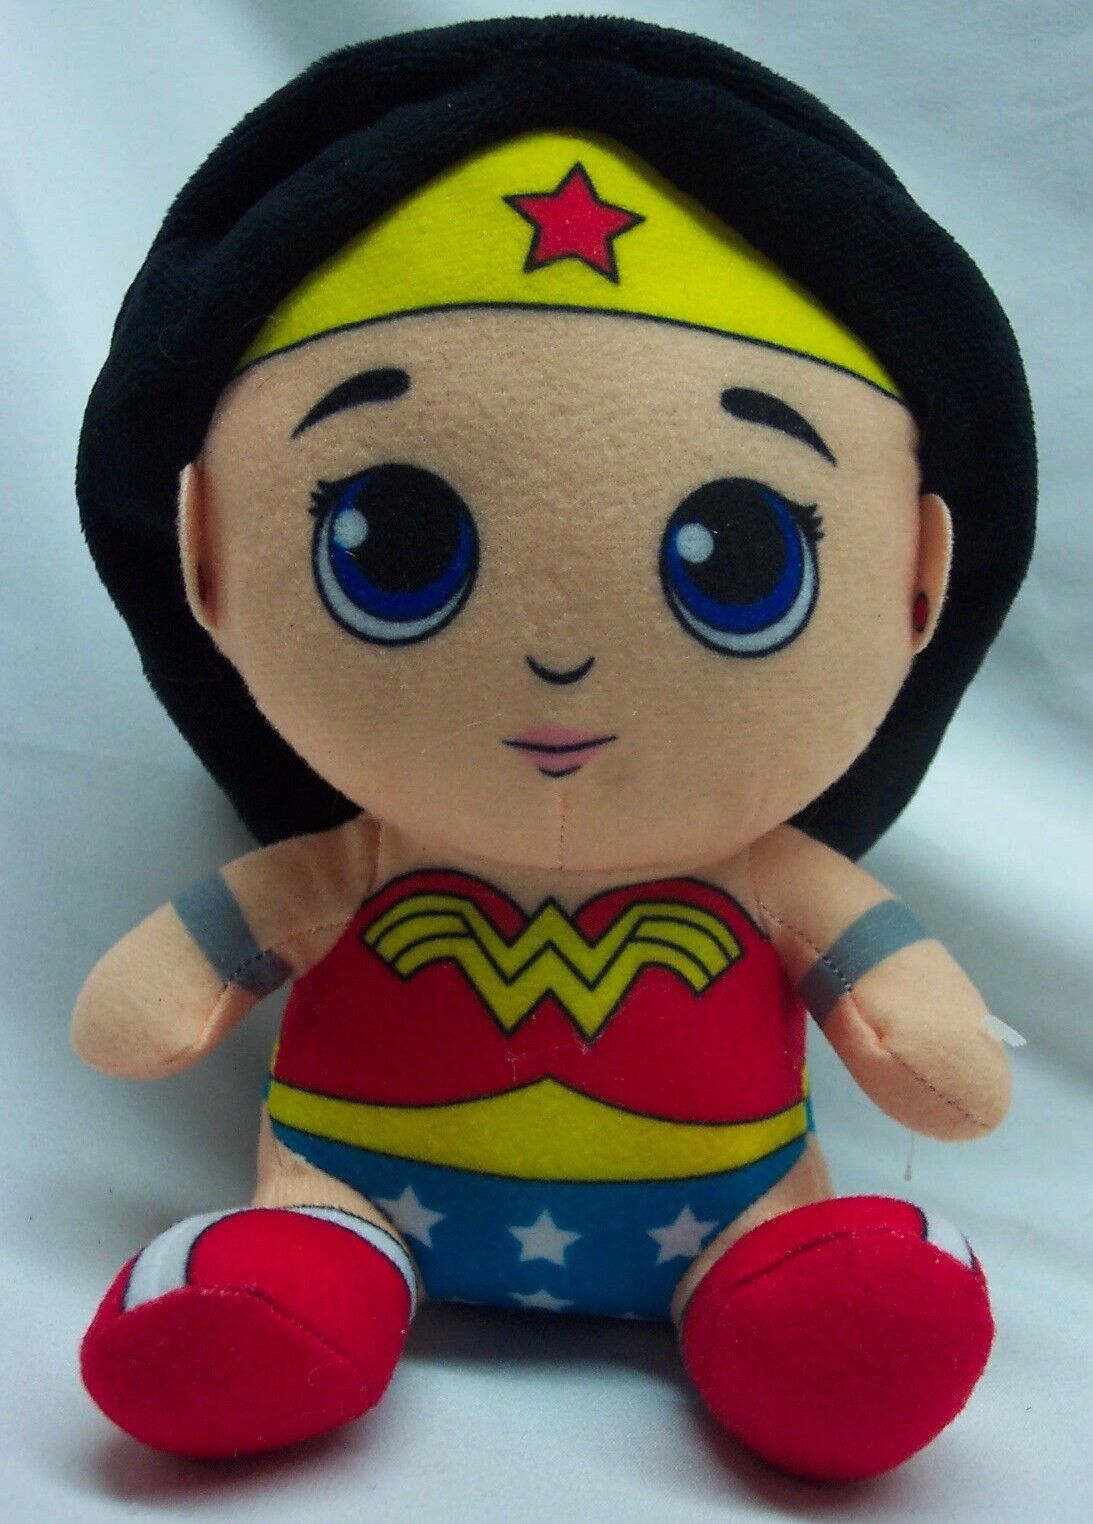 Primary image for DC Comics Justice League WONDER WOMAN 7" Plush Stuffed Doll Toy 2020 Toy Factory